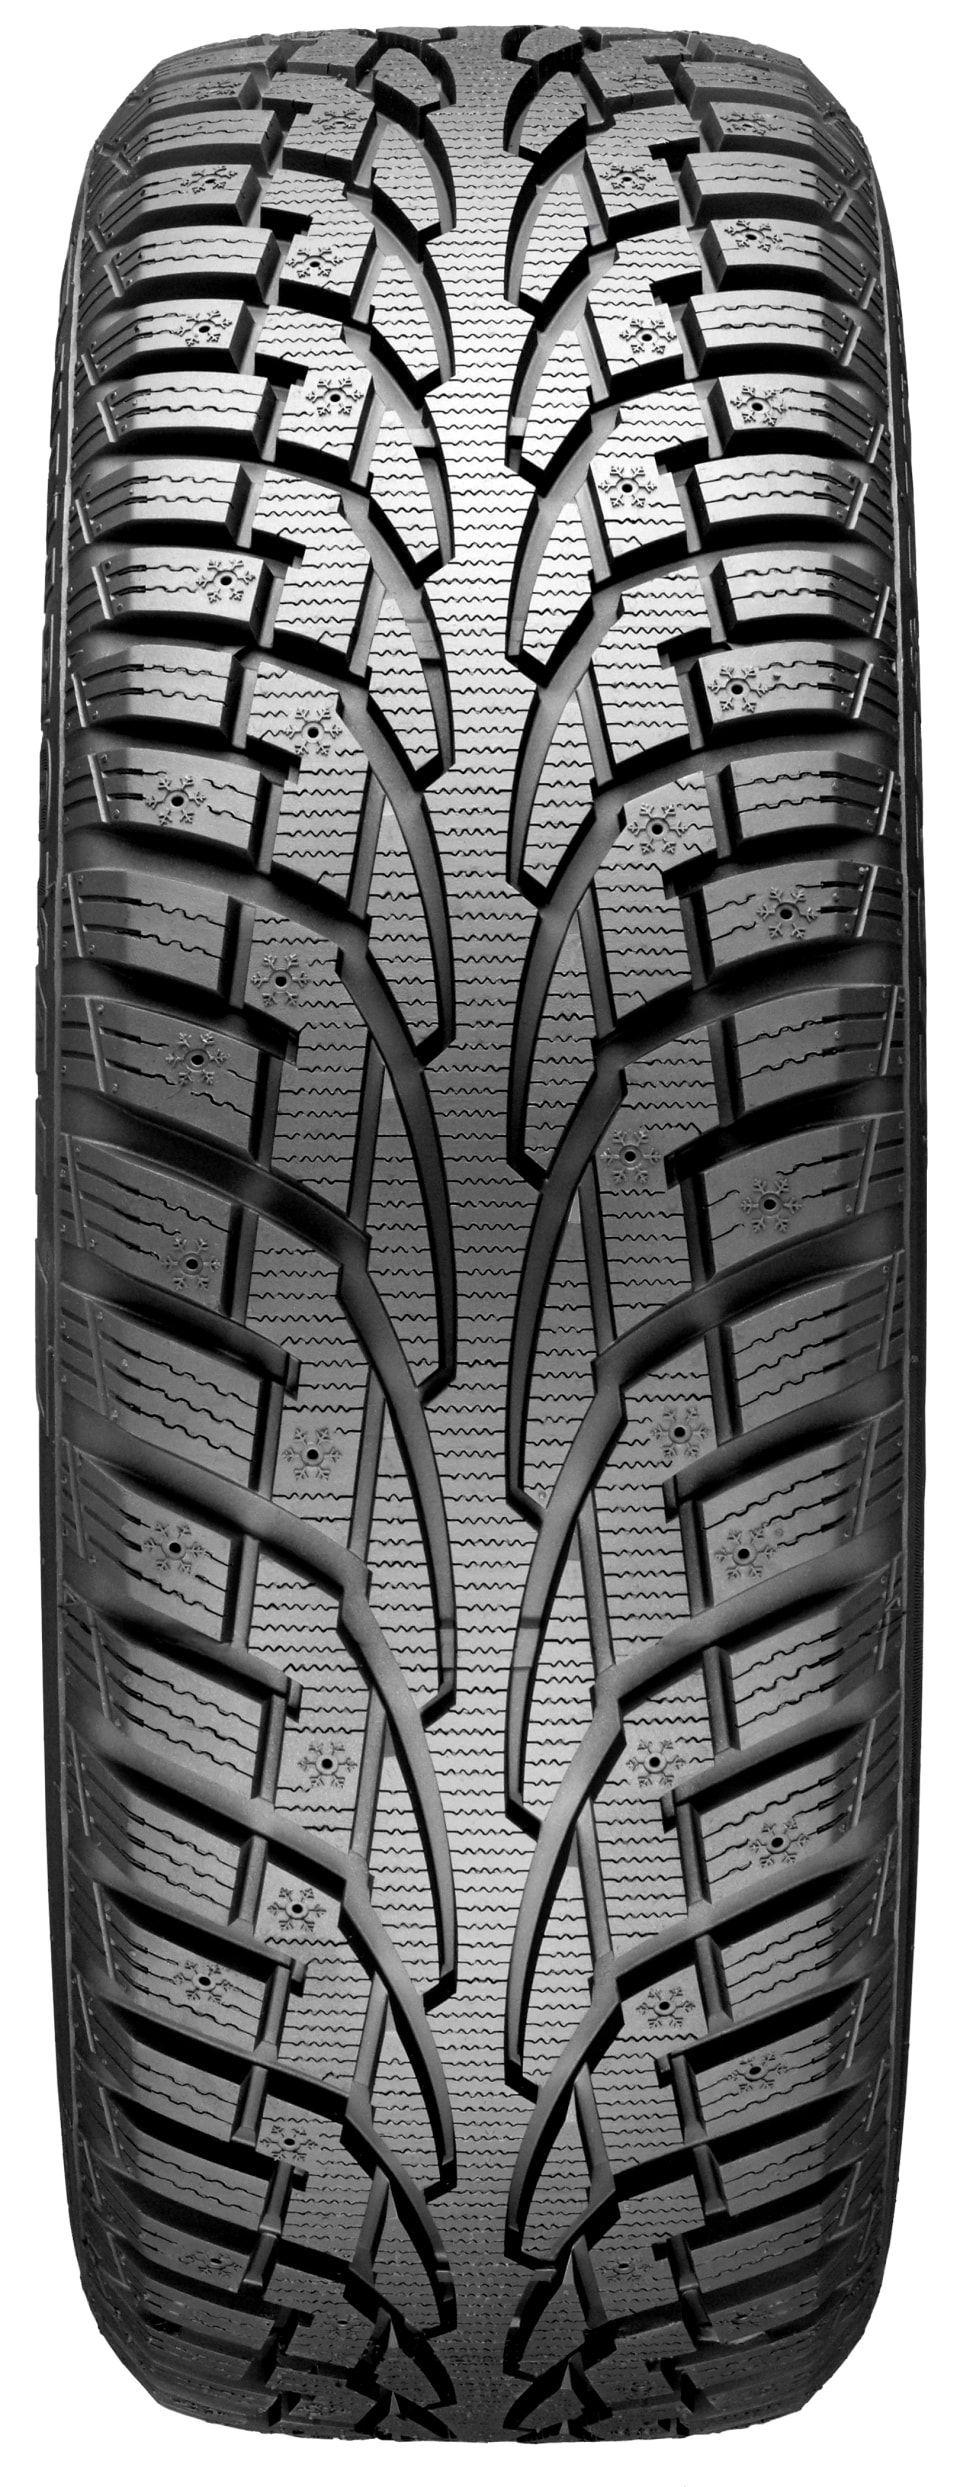 Active Green + Ross Paw Snow Tiger Uniroyal - Ice 79T & 3 P155/80R13 - 